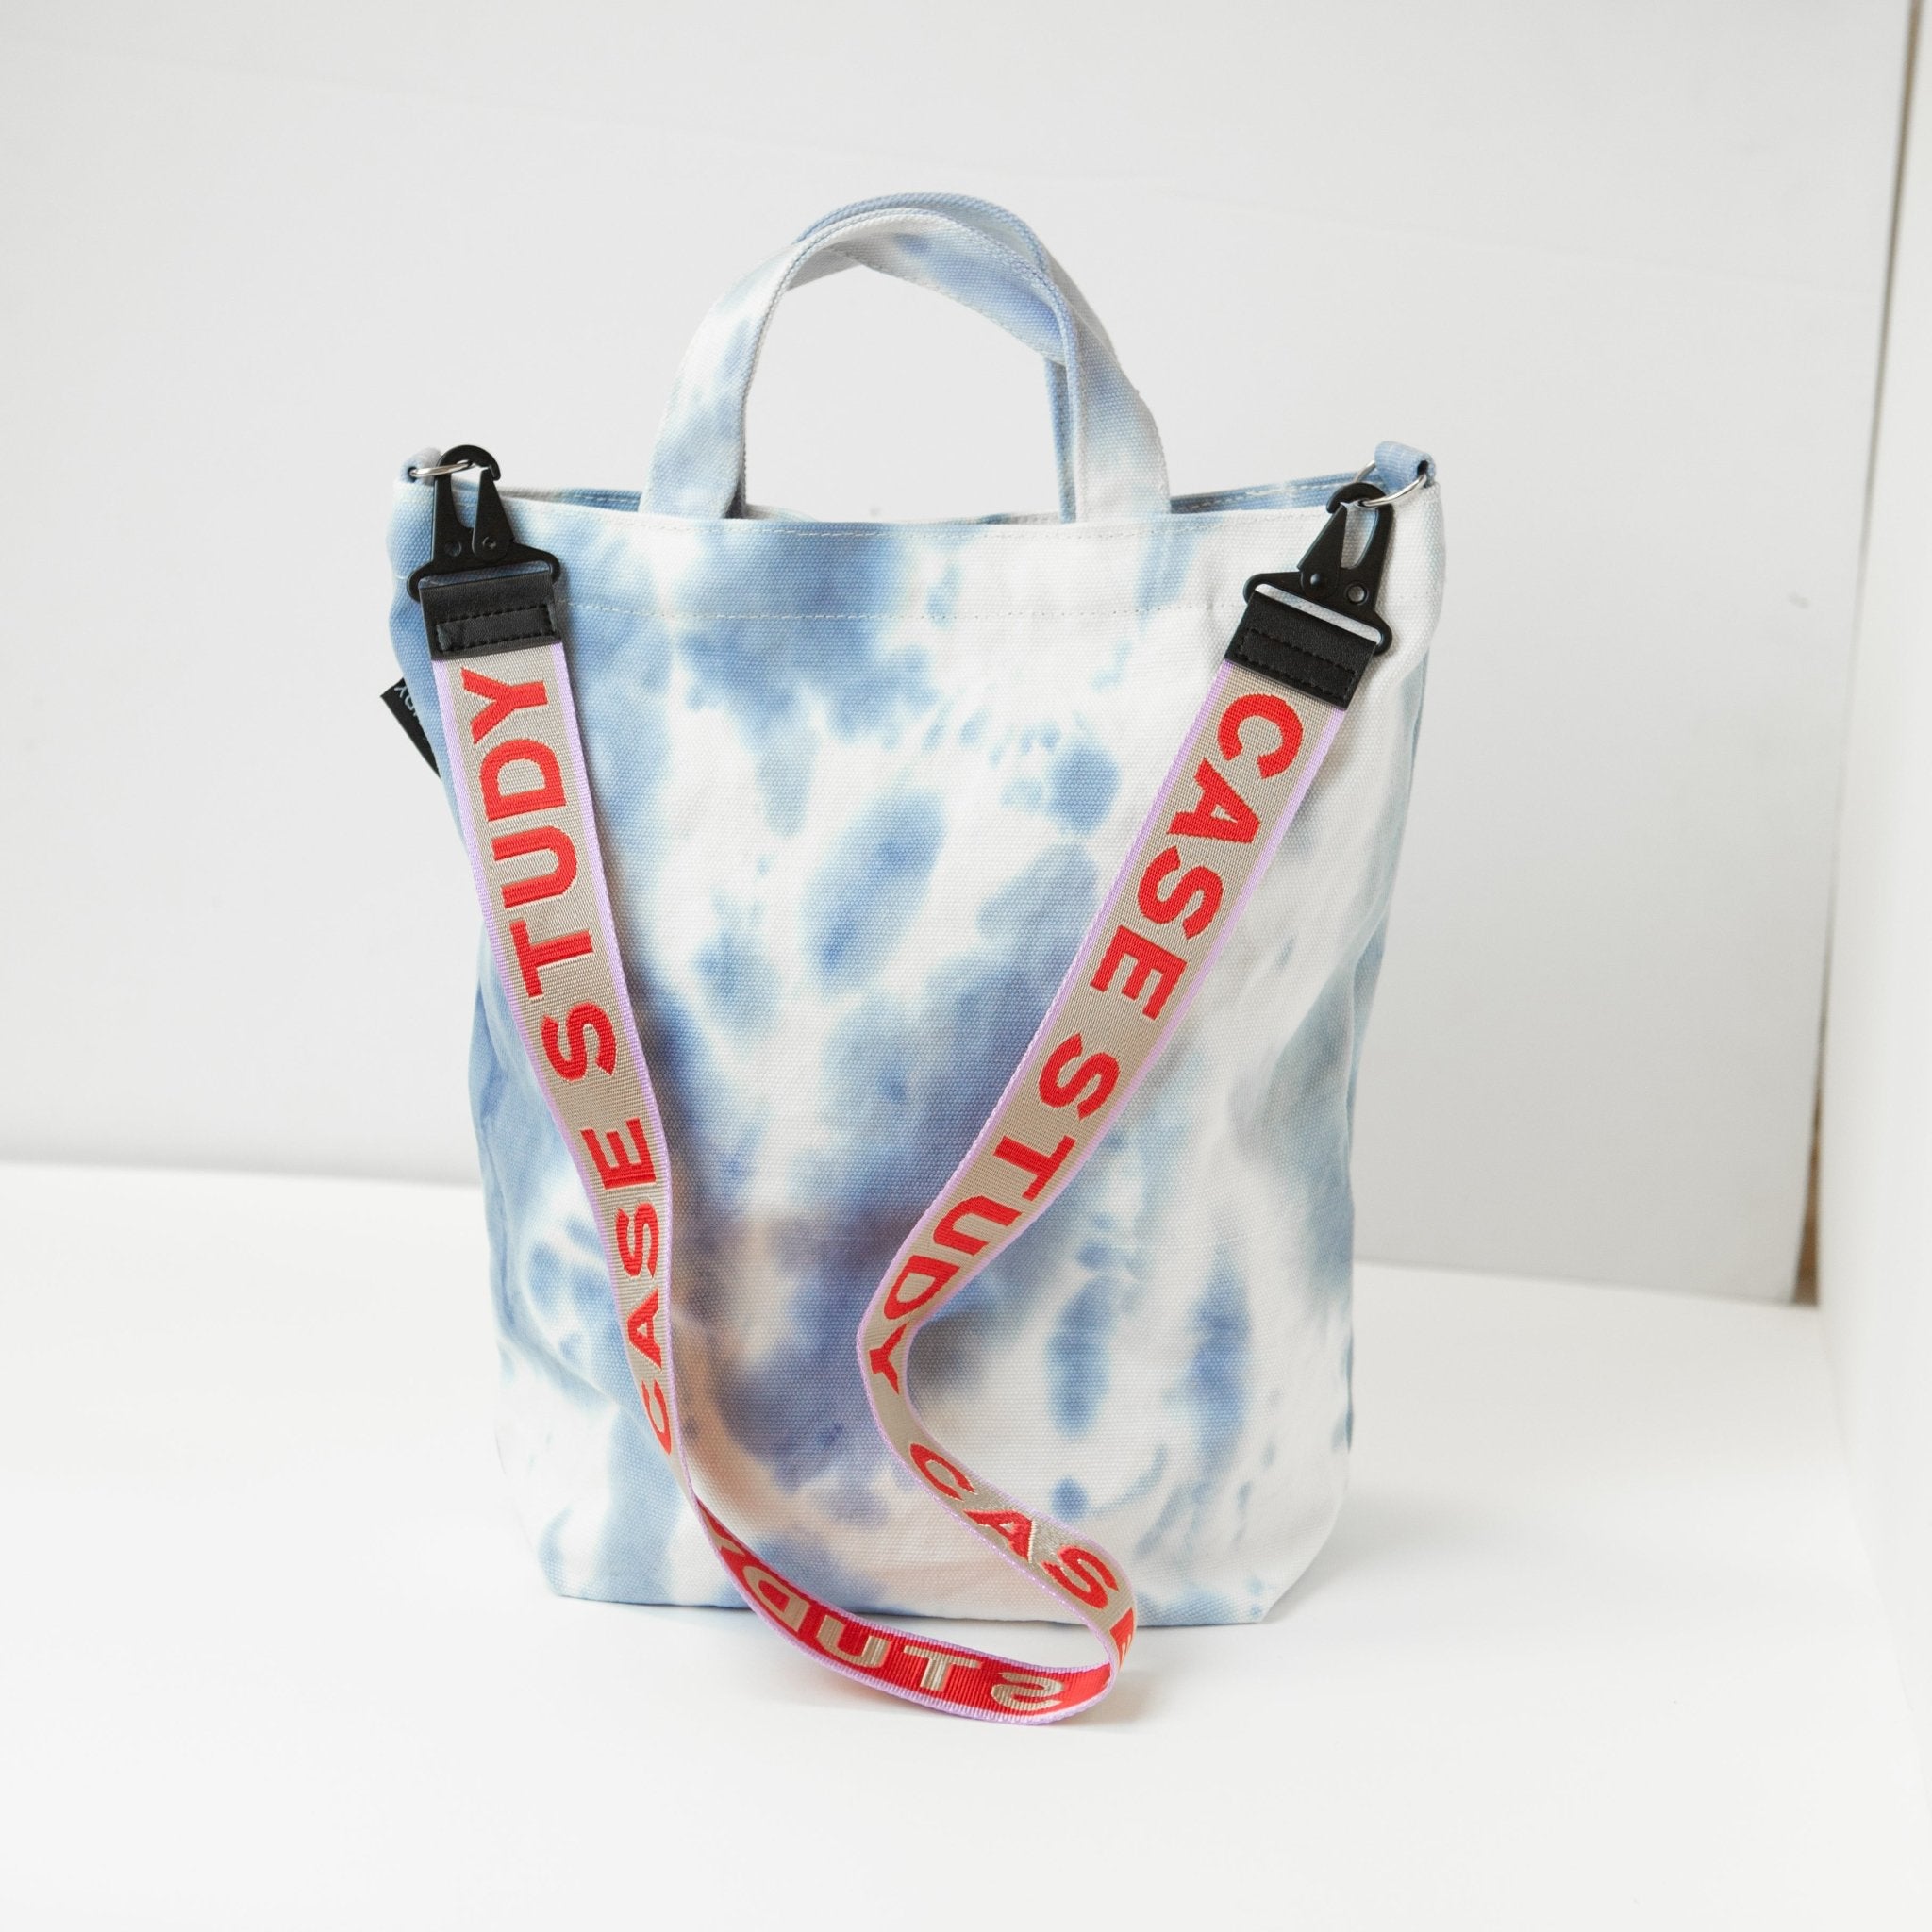 a tie dyed canvas tote in a pale blue and white color with a red and lavender Case Study crossbody strap